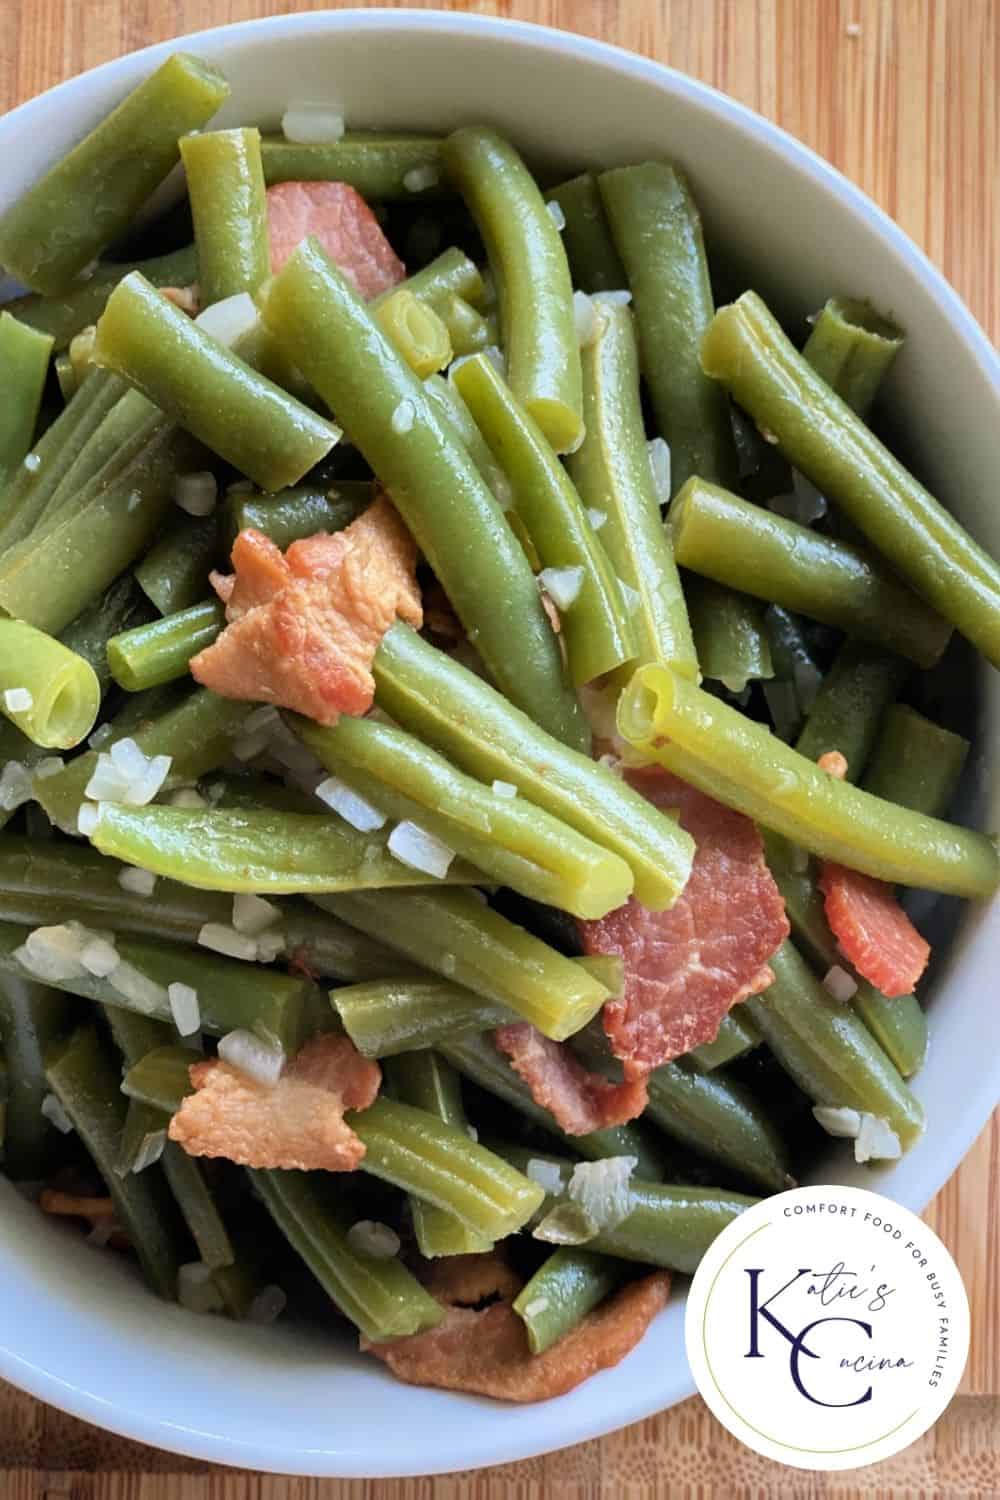 Southern Green Beans Recipe - Katie's Cucina